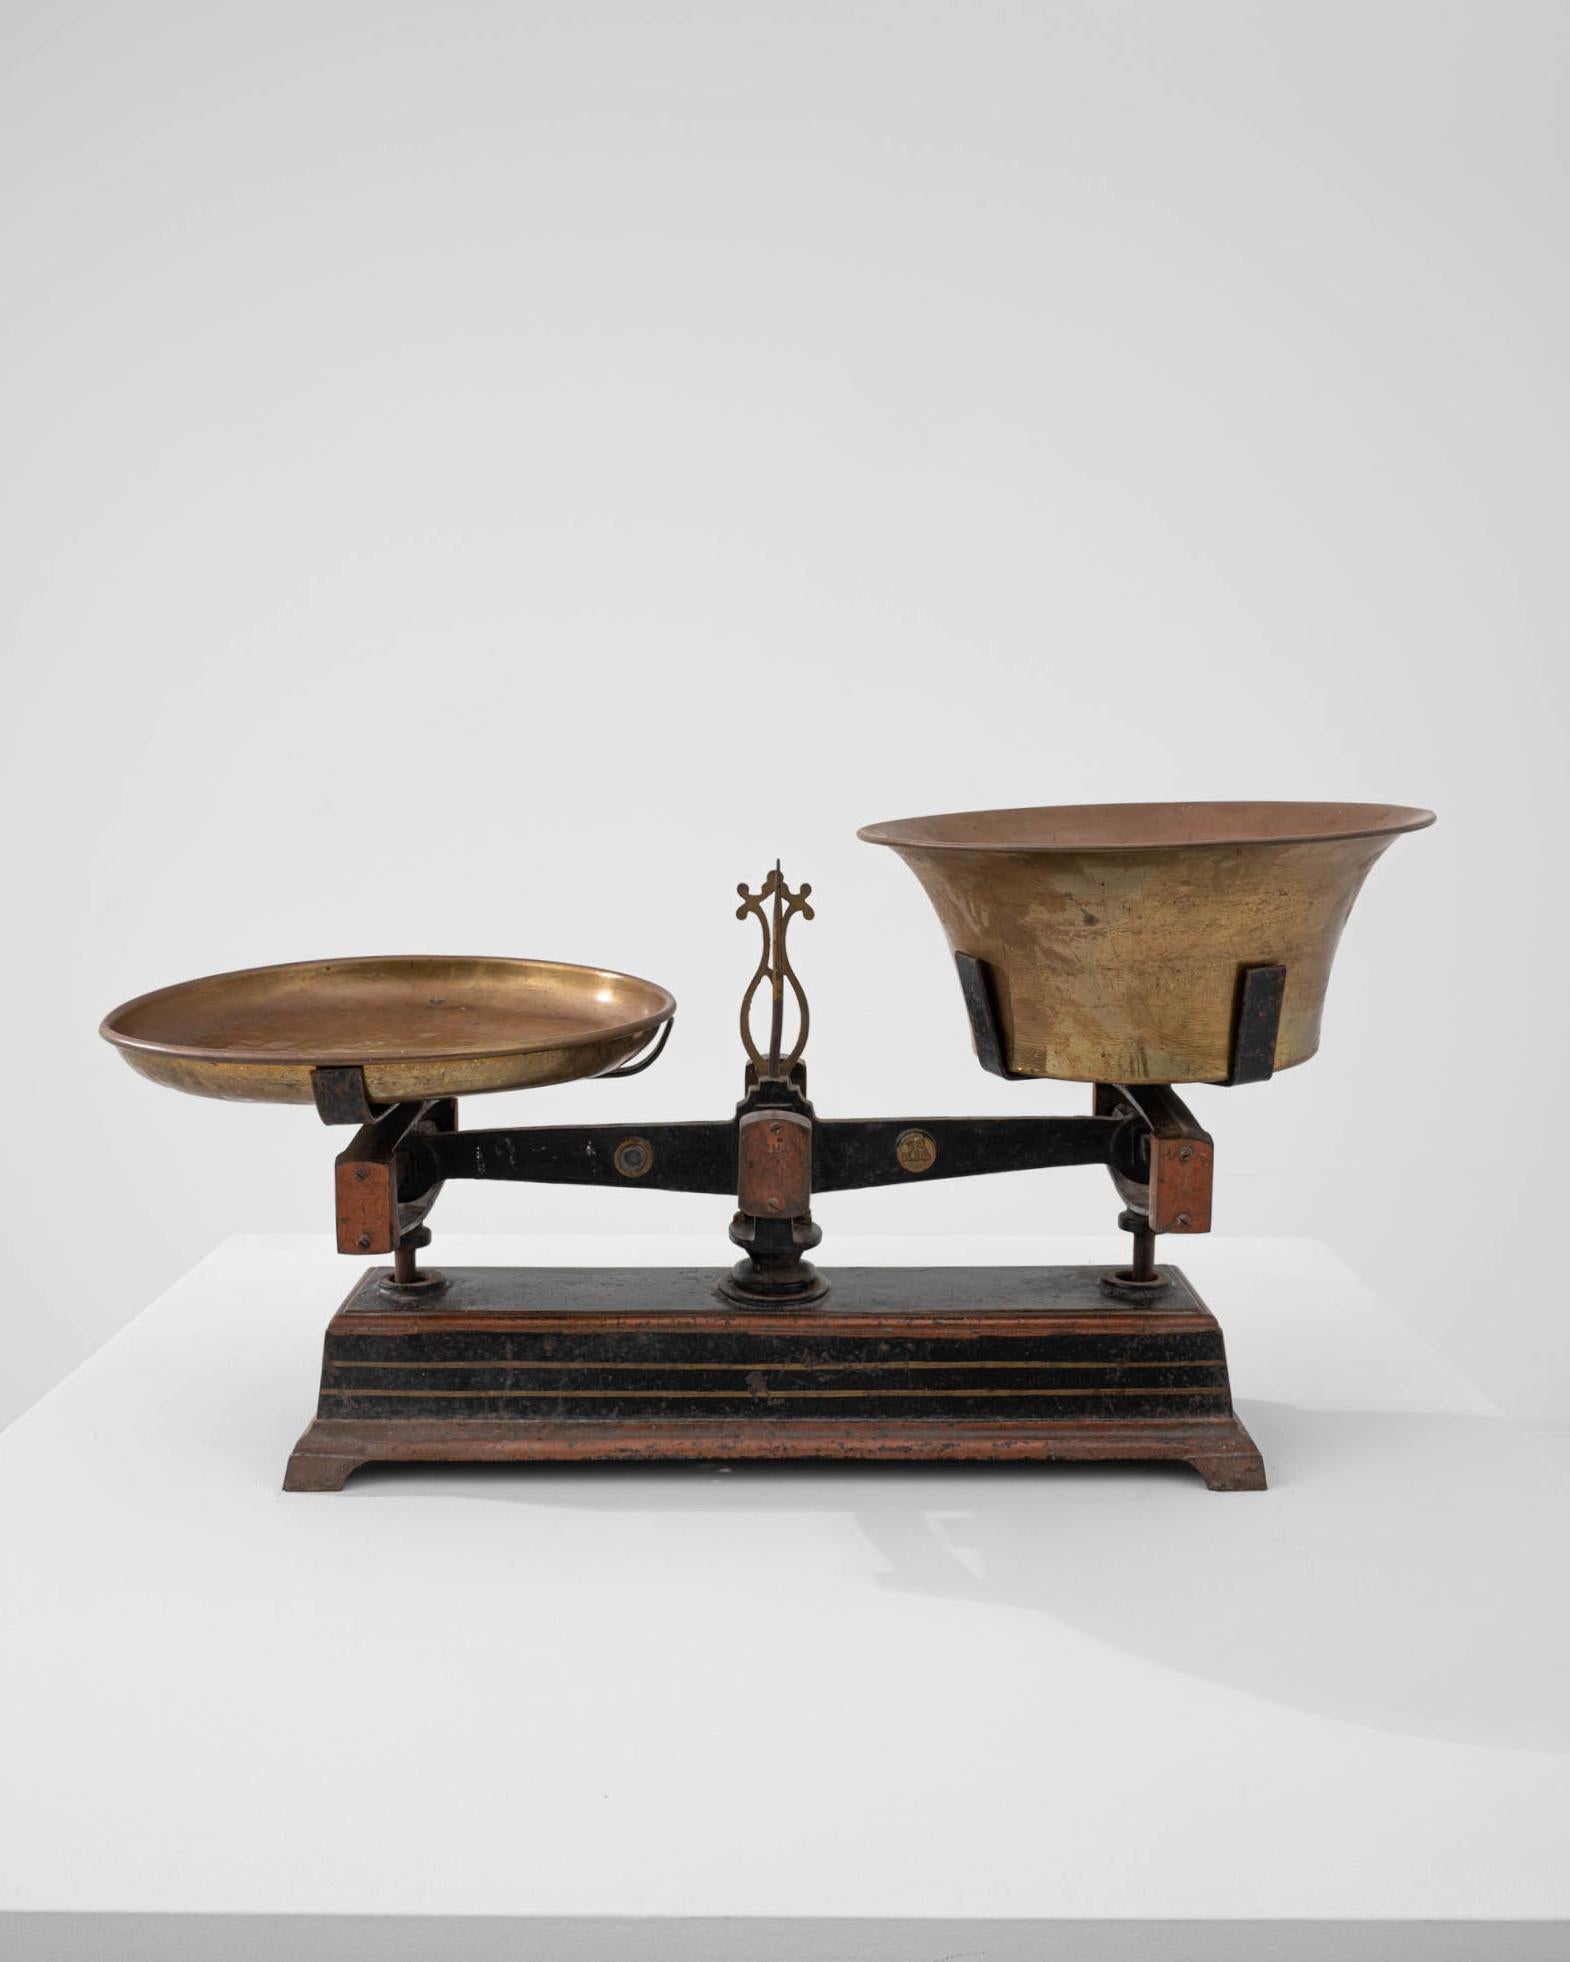 This cast iron scale was made in France, circa 1900. A ubiquitous classic in the home or the market, scales of these dimensions were commonly used to weigh fruits and vegetables. Fully functional, the scale is equipped with brass weighing pans,